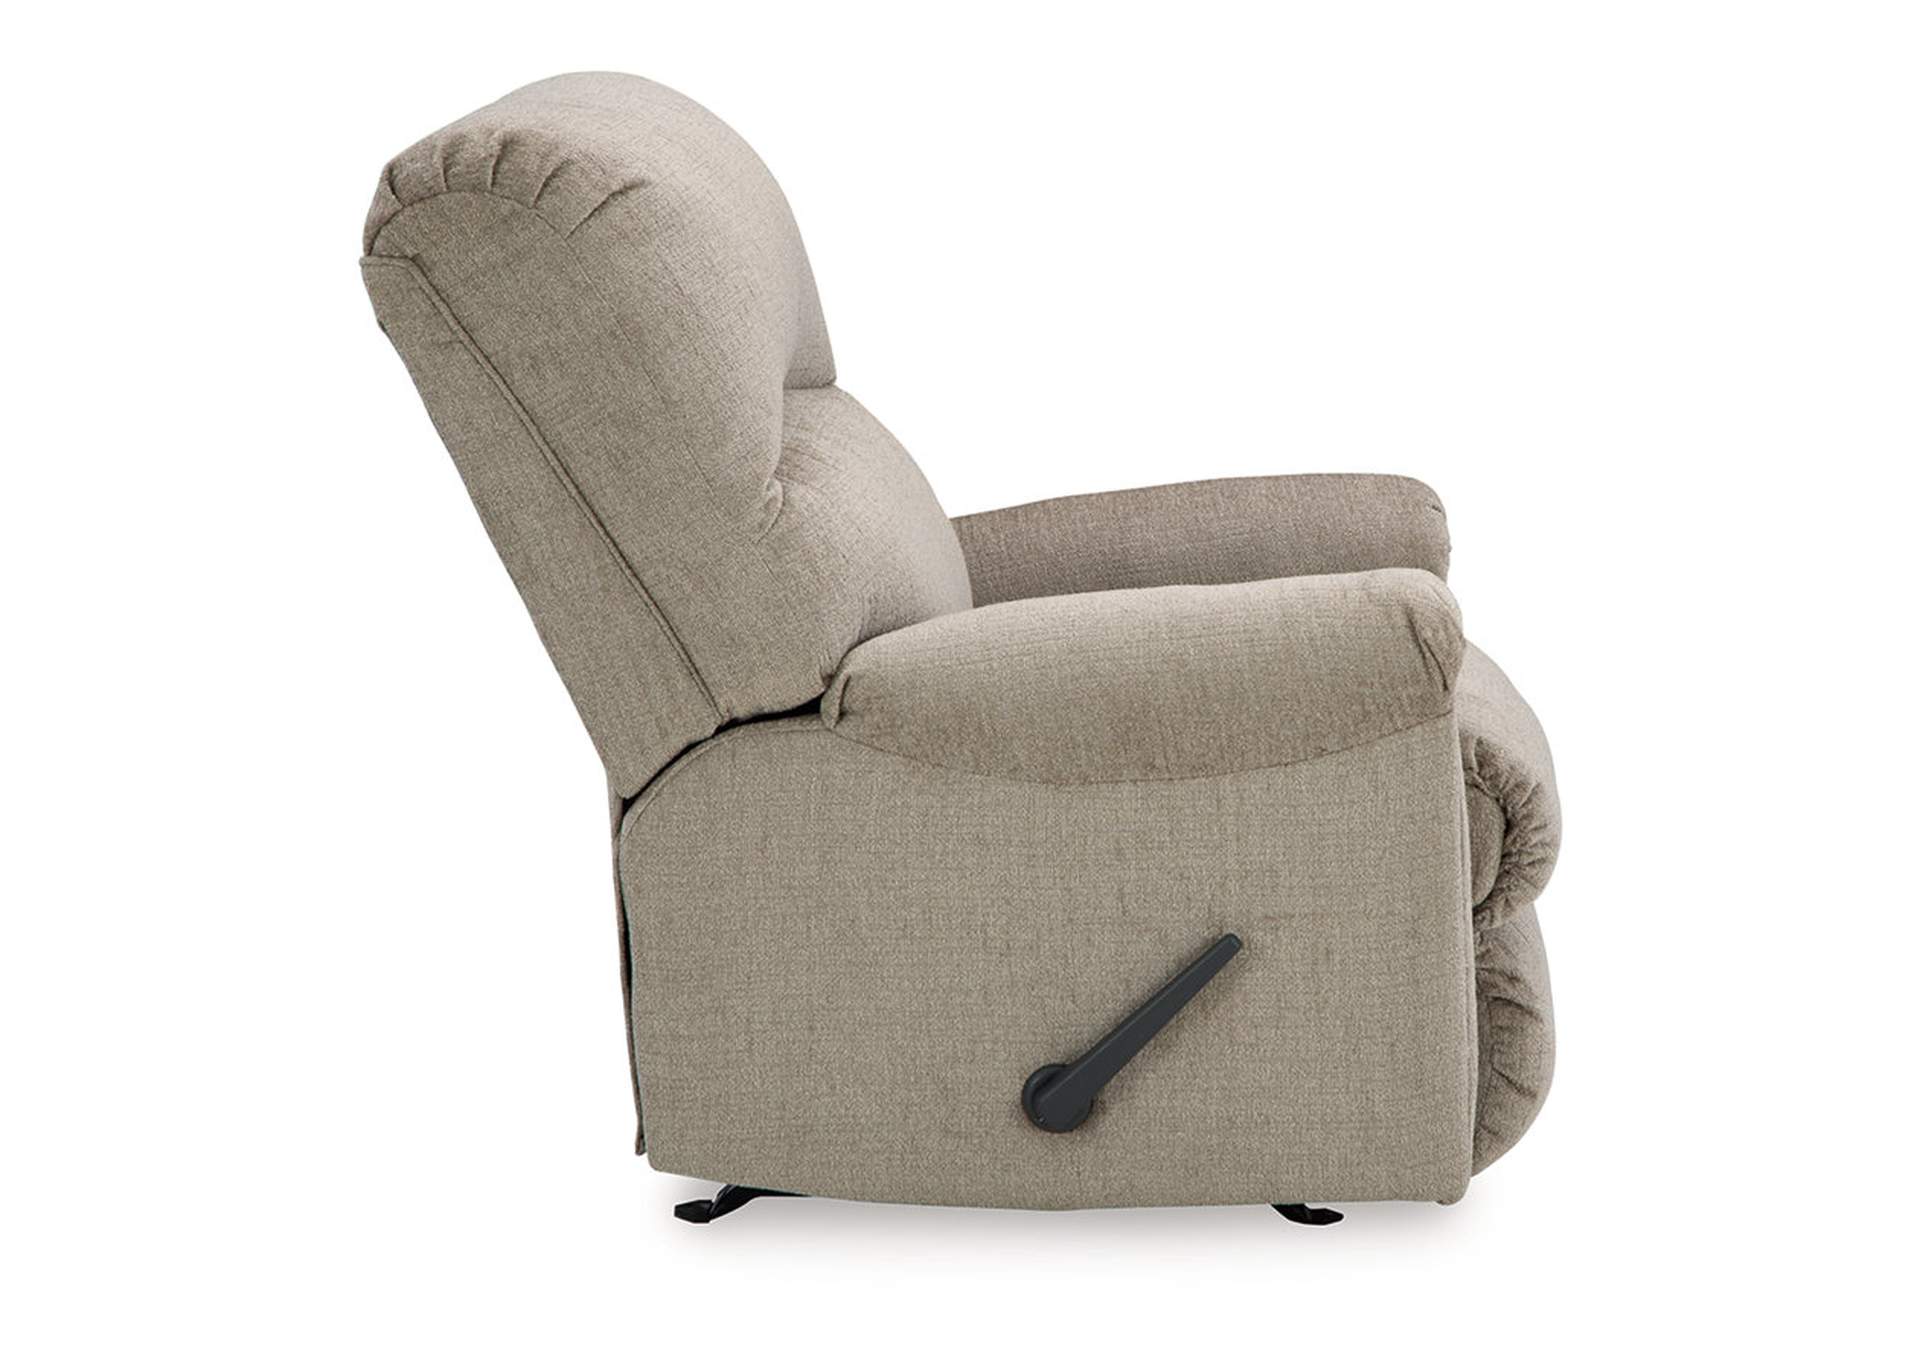 Stonemeade Recliner,Signature Design By Ashley